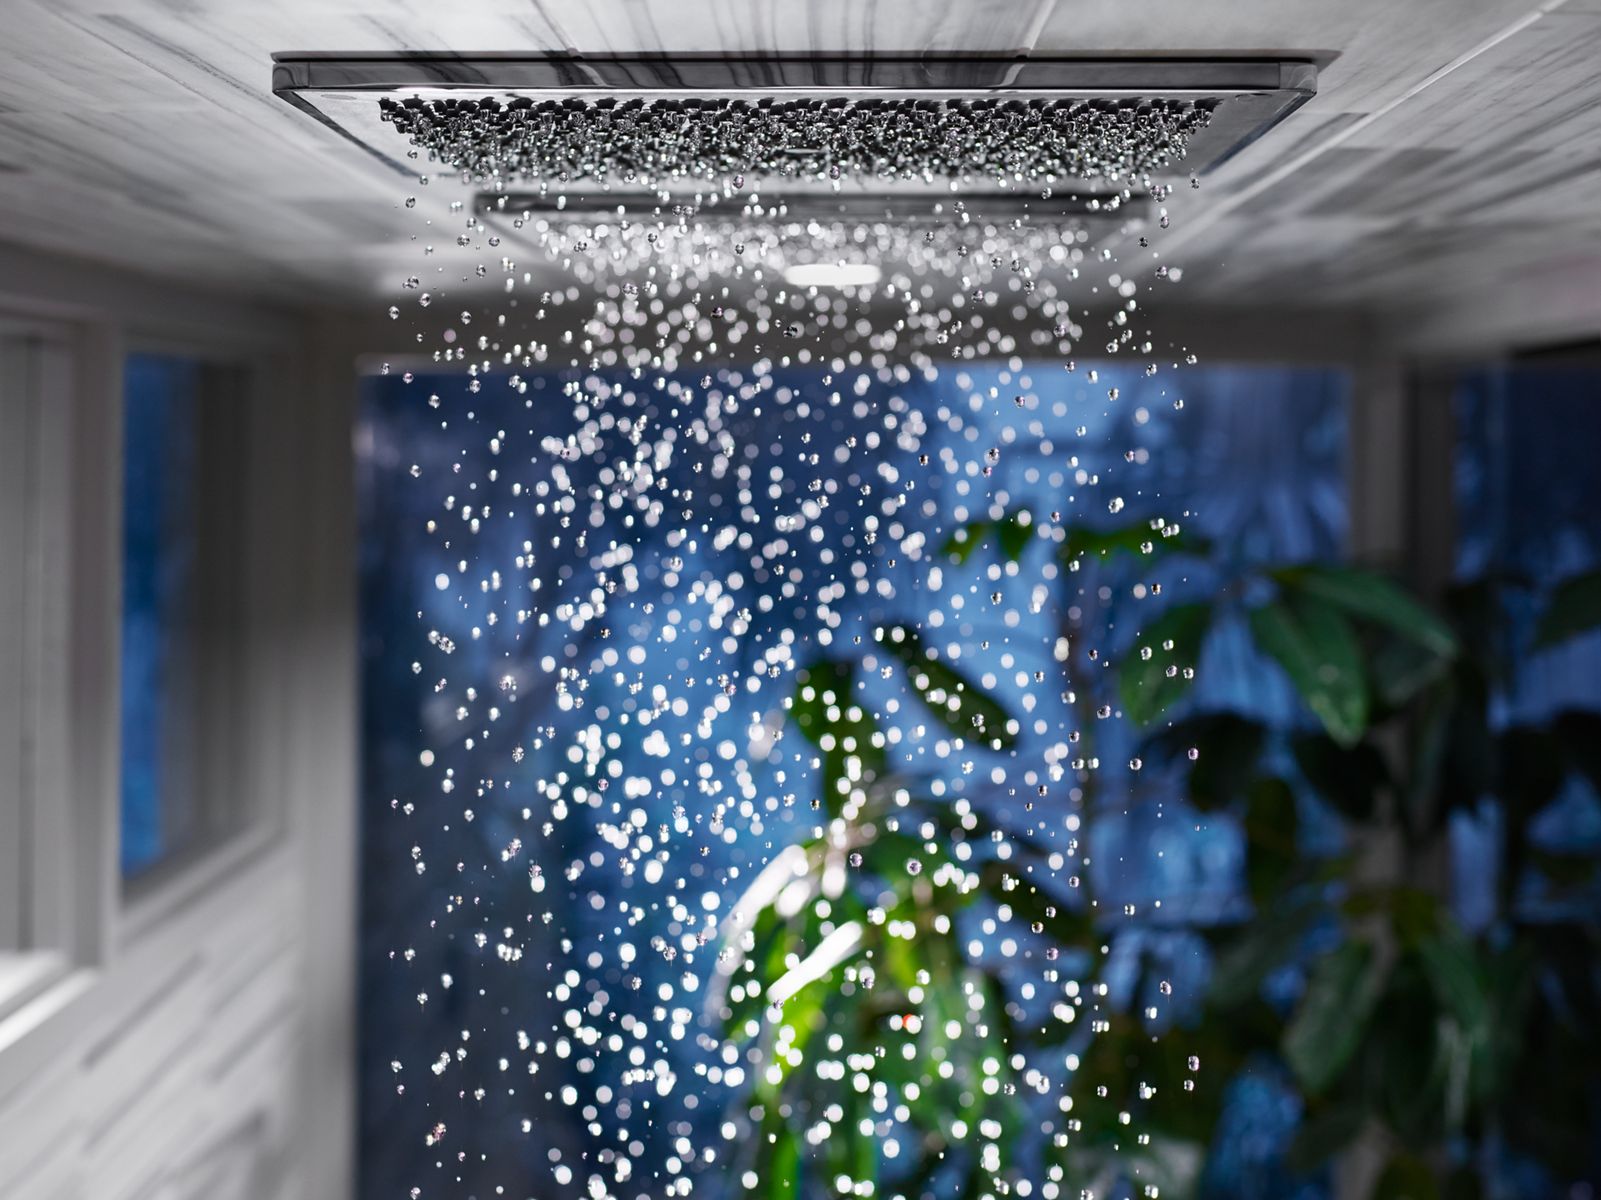 Real Rain From Kohler Brings The Exhilaration Of A Summer